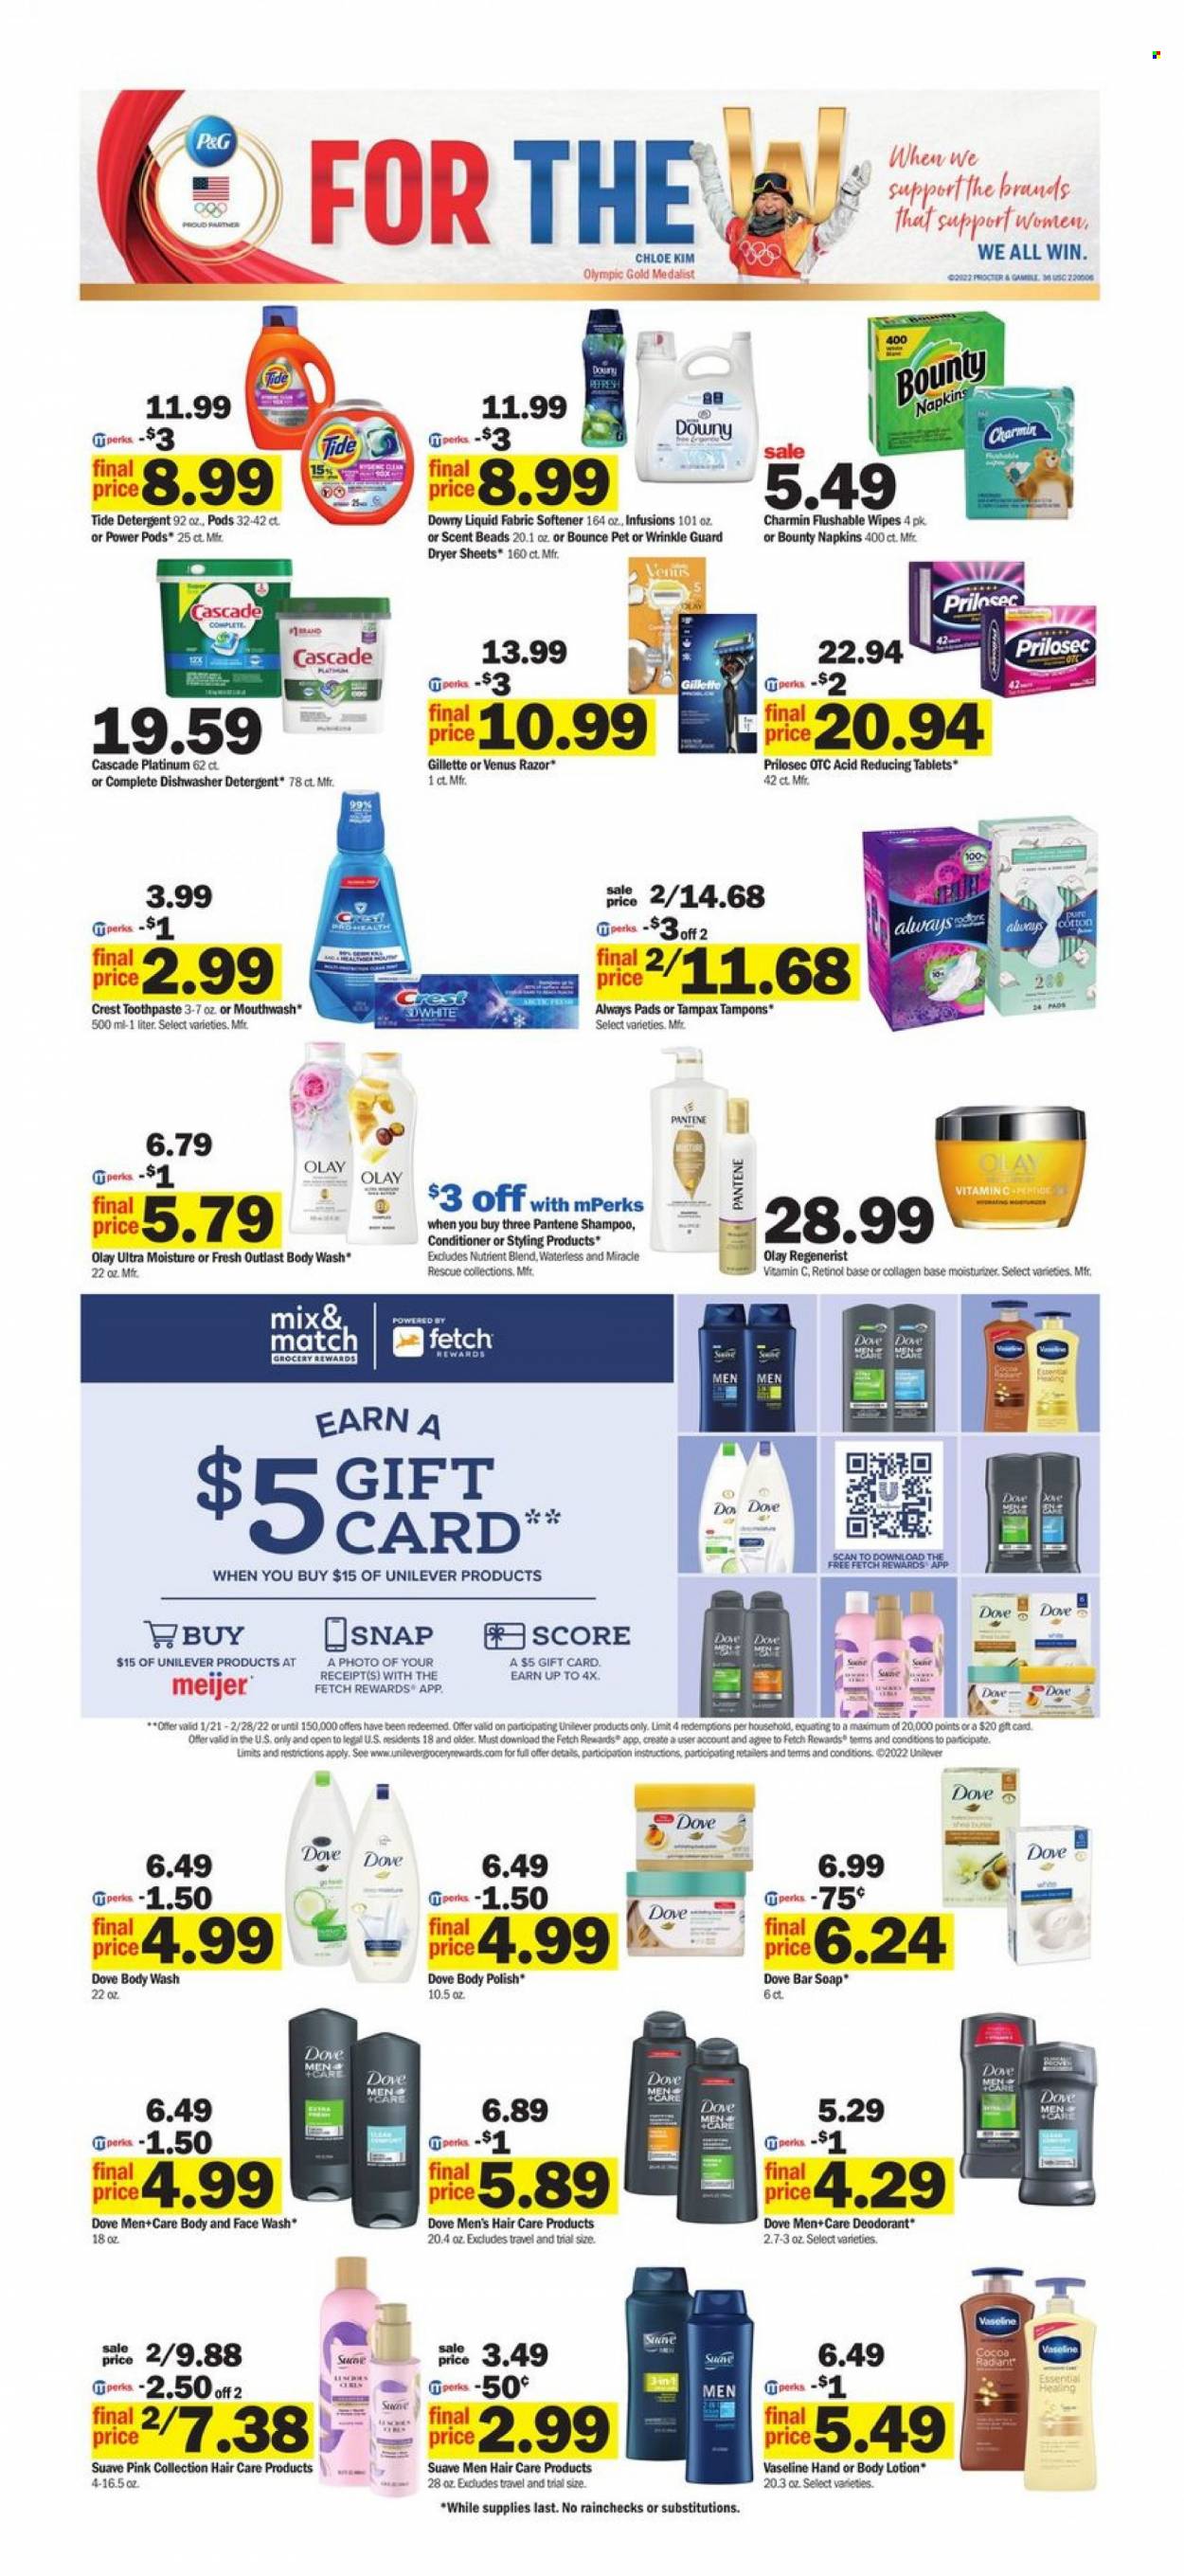 thumbnail - Meijer Flyer - 01/23/2022 - 01/29/2022 - Sales products - Bounty, wipes, napkins, Charmin, detergent, Cascade, Tide, fabric softener, Bounce, dryer sheets, Downy Laundry, body wash, Dove, shampoo, Suave, face gel, Vaseline, soap bar, soap, toothpaste, mouthwash, Crest, Tampax, Always pads, tampons, moisturizer, Olay, face wash, conditioner, Pantene, body lotion, anti-perspirant, Chloé, deodorant, Gillette, razor, Venus, polish, vitamin c. Page 16.